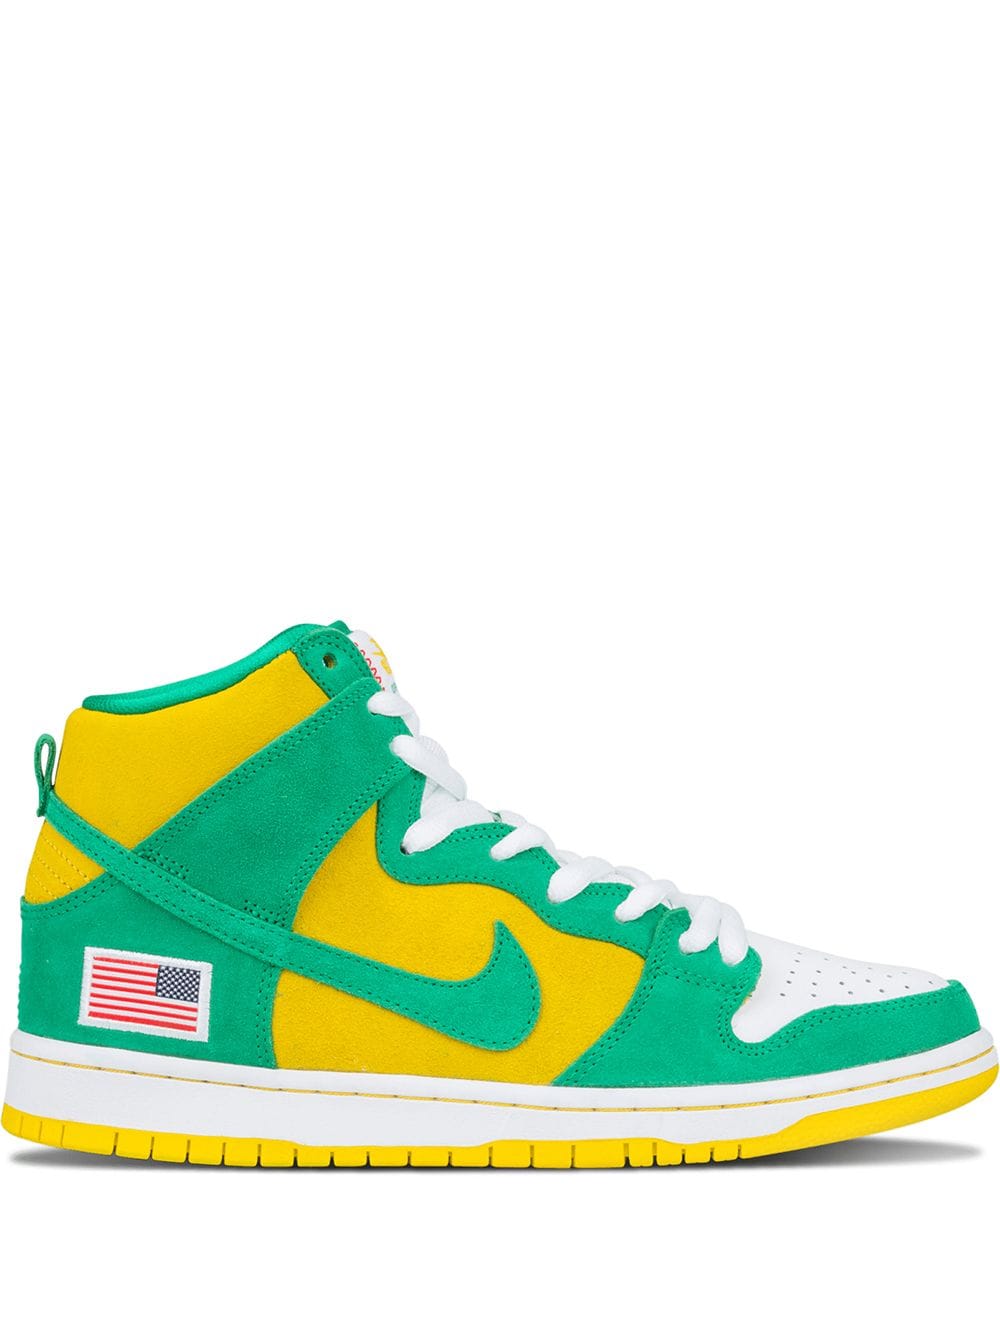 Nike Dunk High Pro SB "Oakland A'S" sneakers - Green von Nike